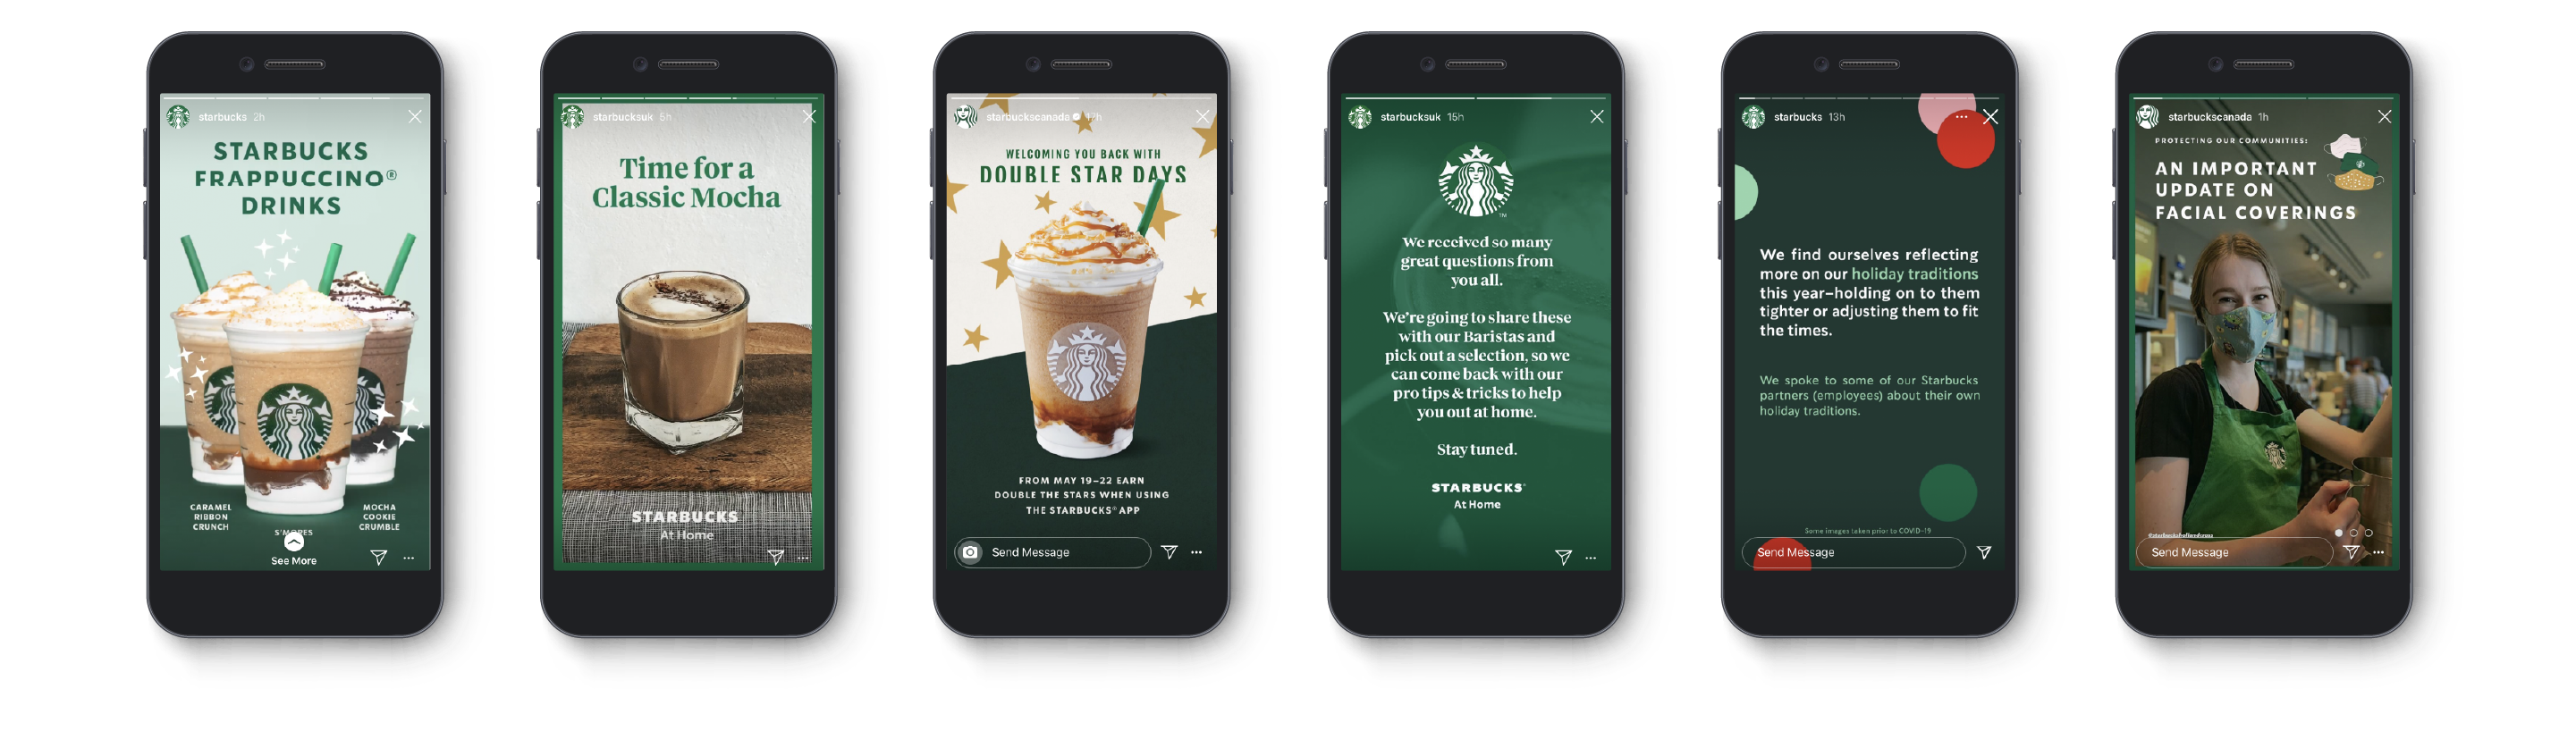 <b class="accent">FIG. 17 — </b> Instagram Stories content from the [@starbucks instagram account](https://www.instagram.com/starbucks/ "@starbucks instagram account") and its UK/Canada counterparts. Design: Starbucks